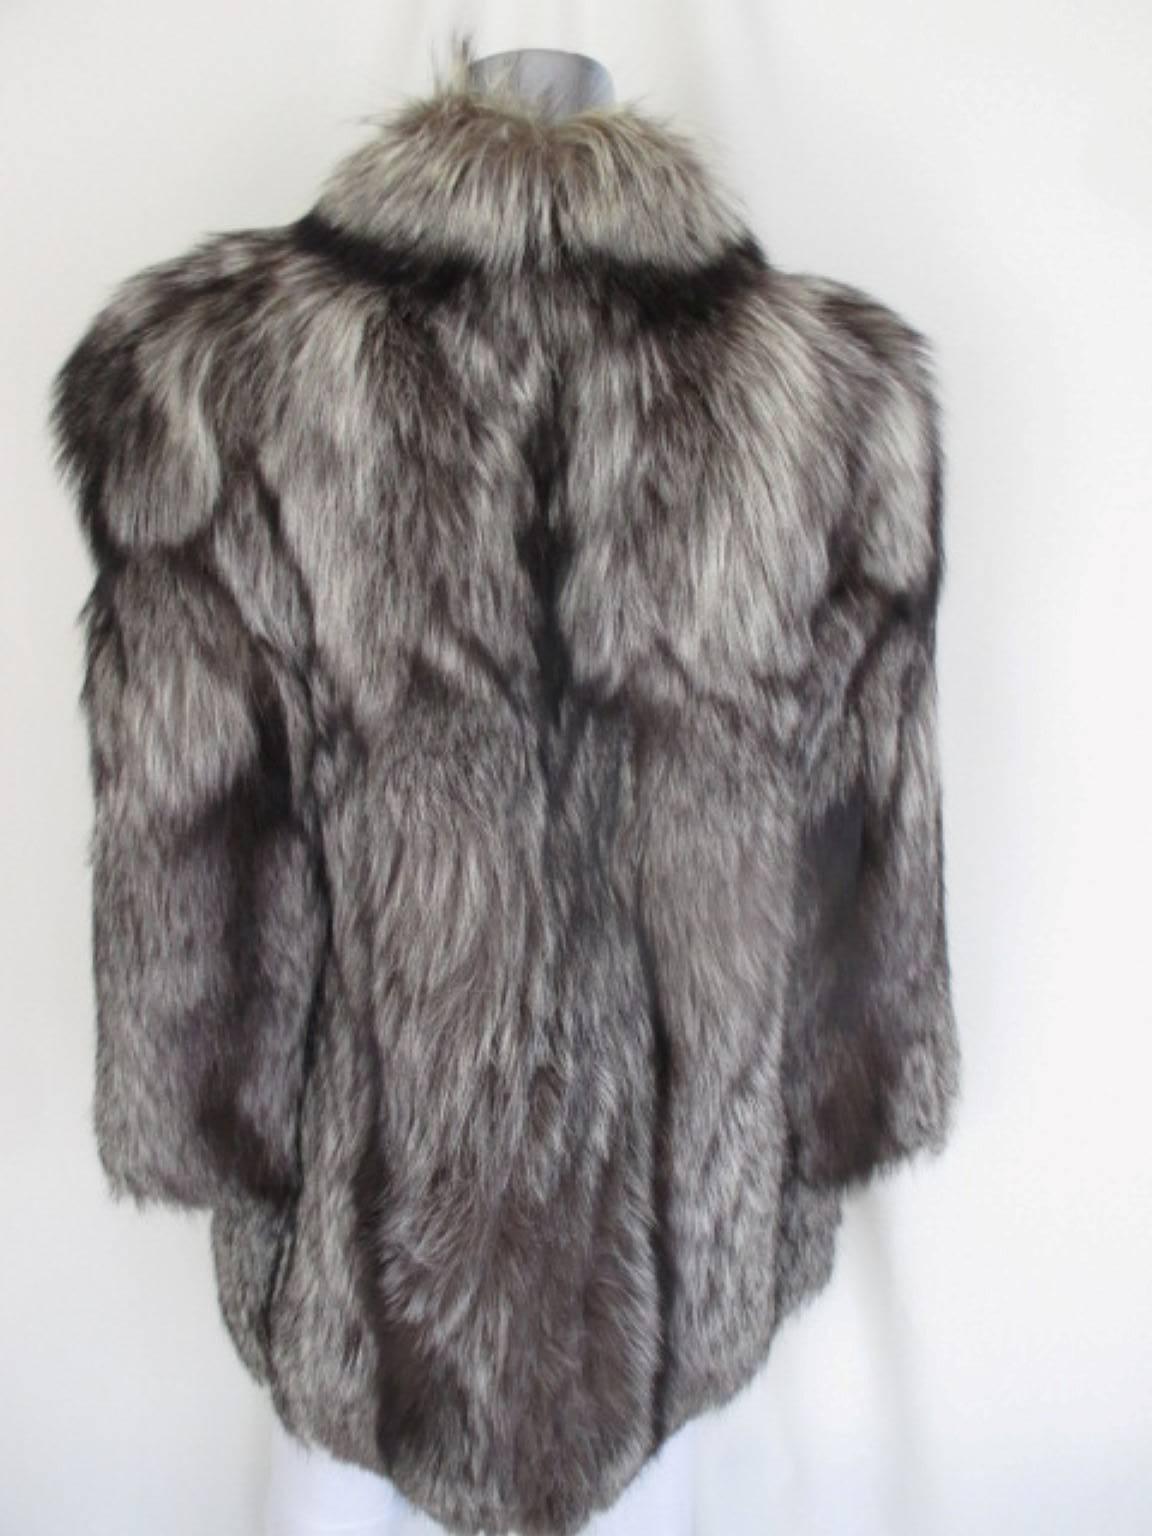 Beautiful rare silver fox fur coat is very light to wear has 2 pockets and 3 closing buttons.
Excellent vintage condition
Size is about EU 40 / US10